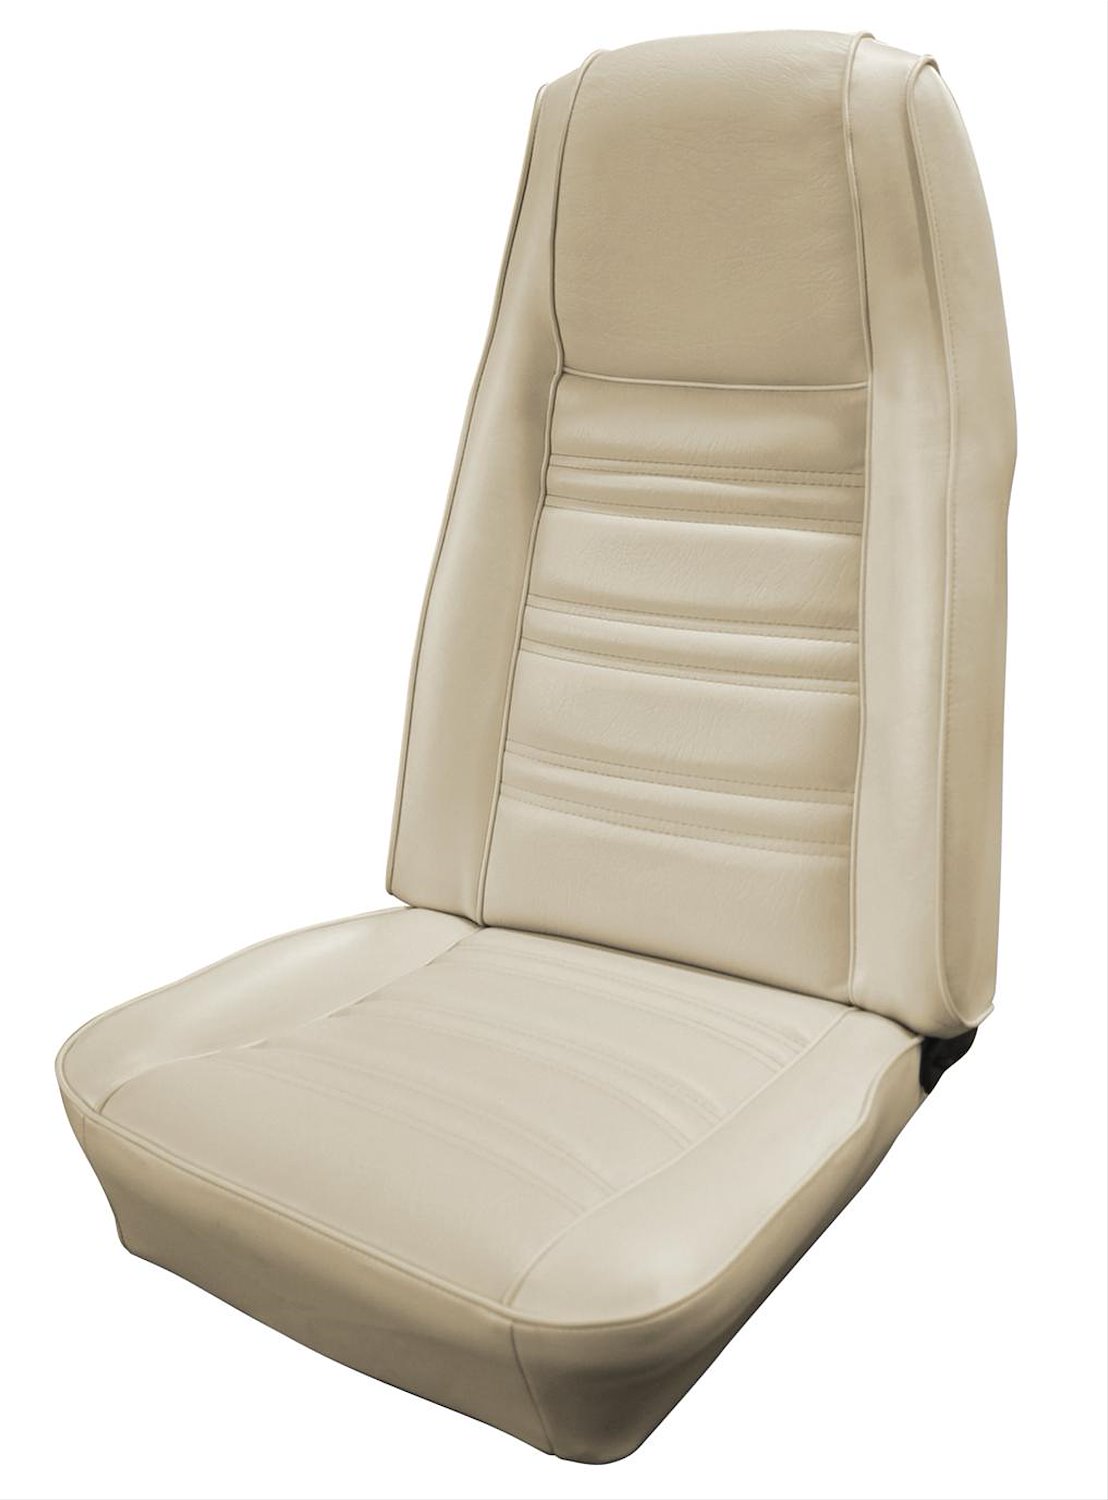 1970 Ford Mustang Sports-Roof Standard Interior Front Bucket and Rear Bench Seat Upholstery Set